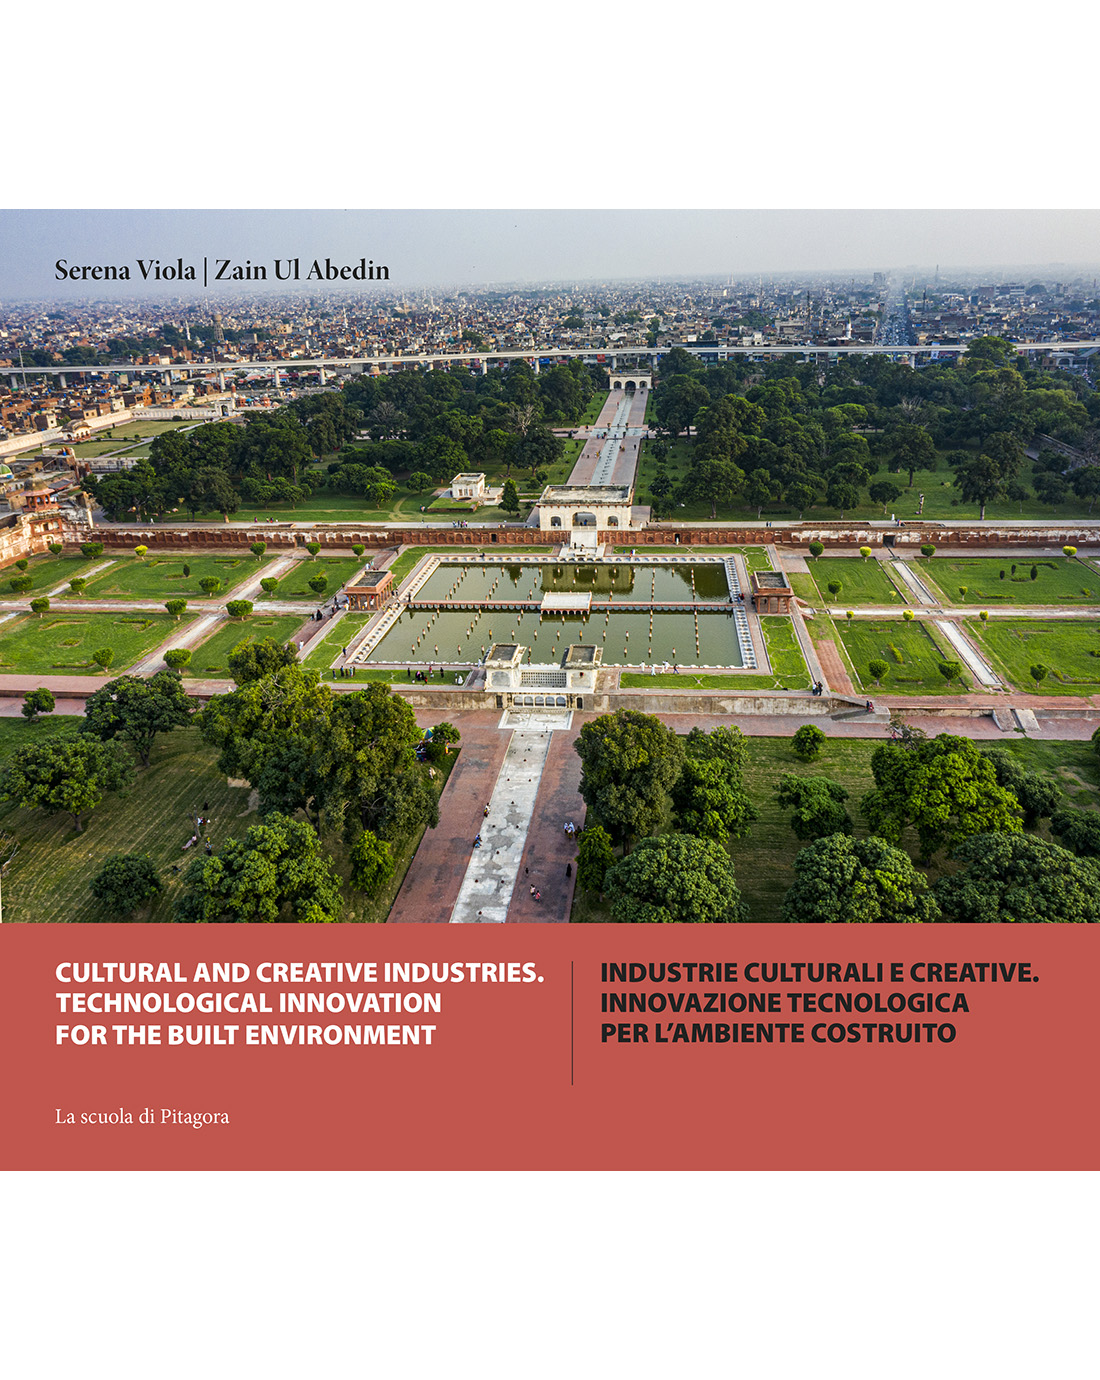 CULTURAL AND CREATIVE INDUSTRIES. TECHNOLOGICAL INNOVATION FOR THE BUILT ENVIRONMENT (open access)